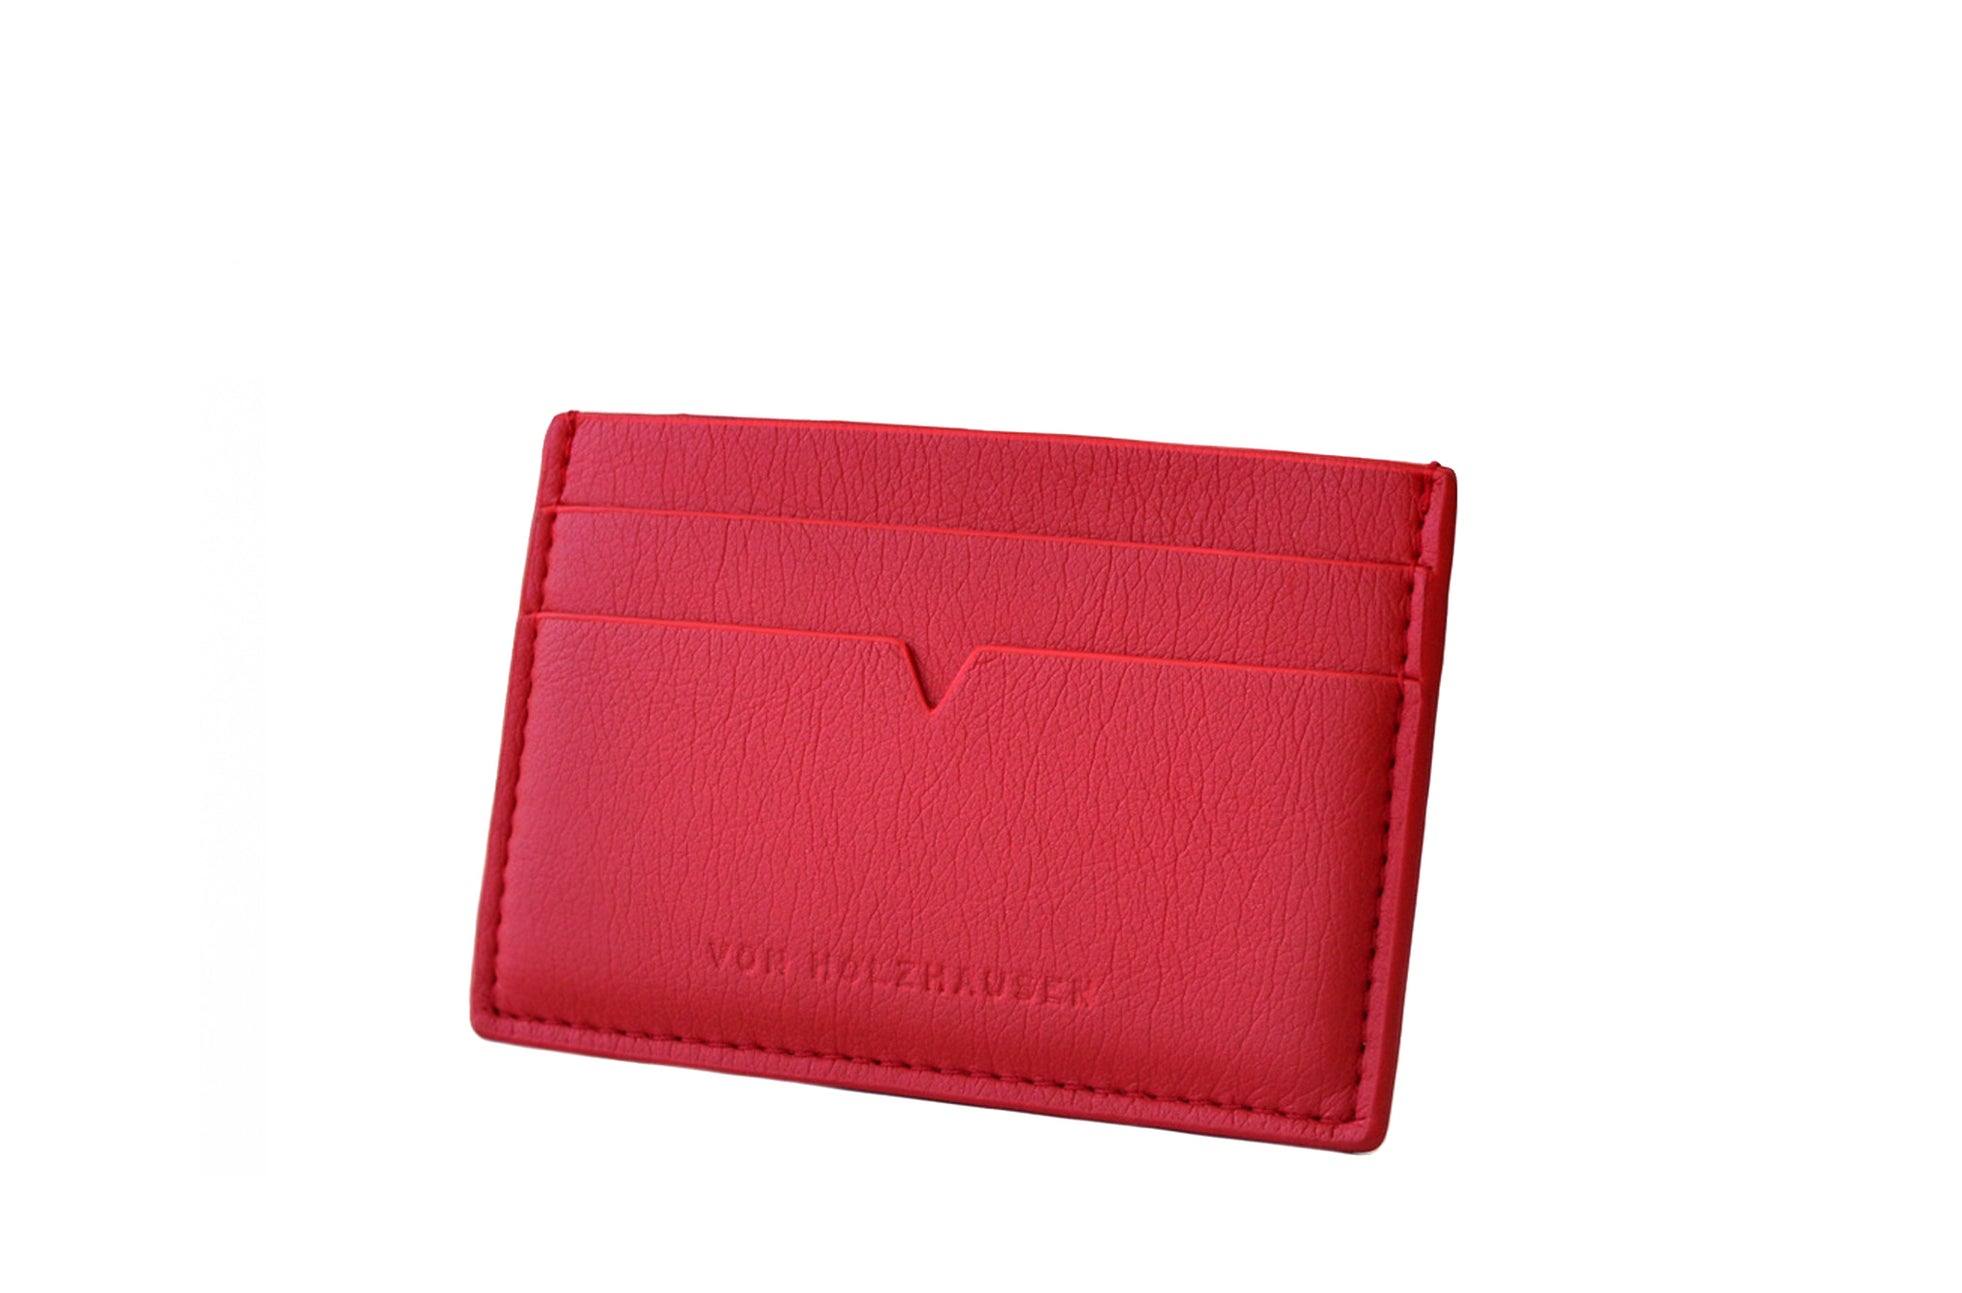 The Credit Card Holder in Technik in Cherry image 4